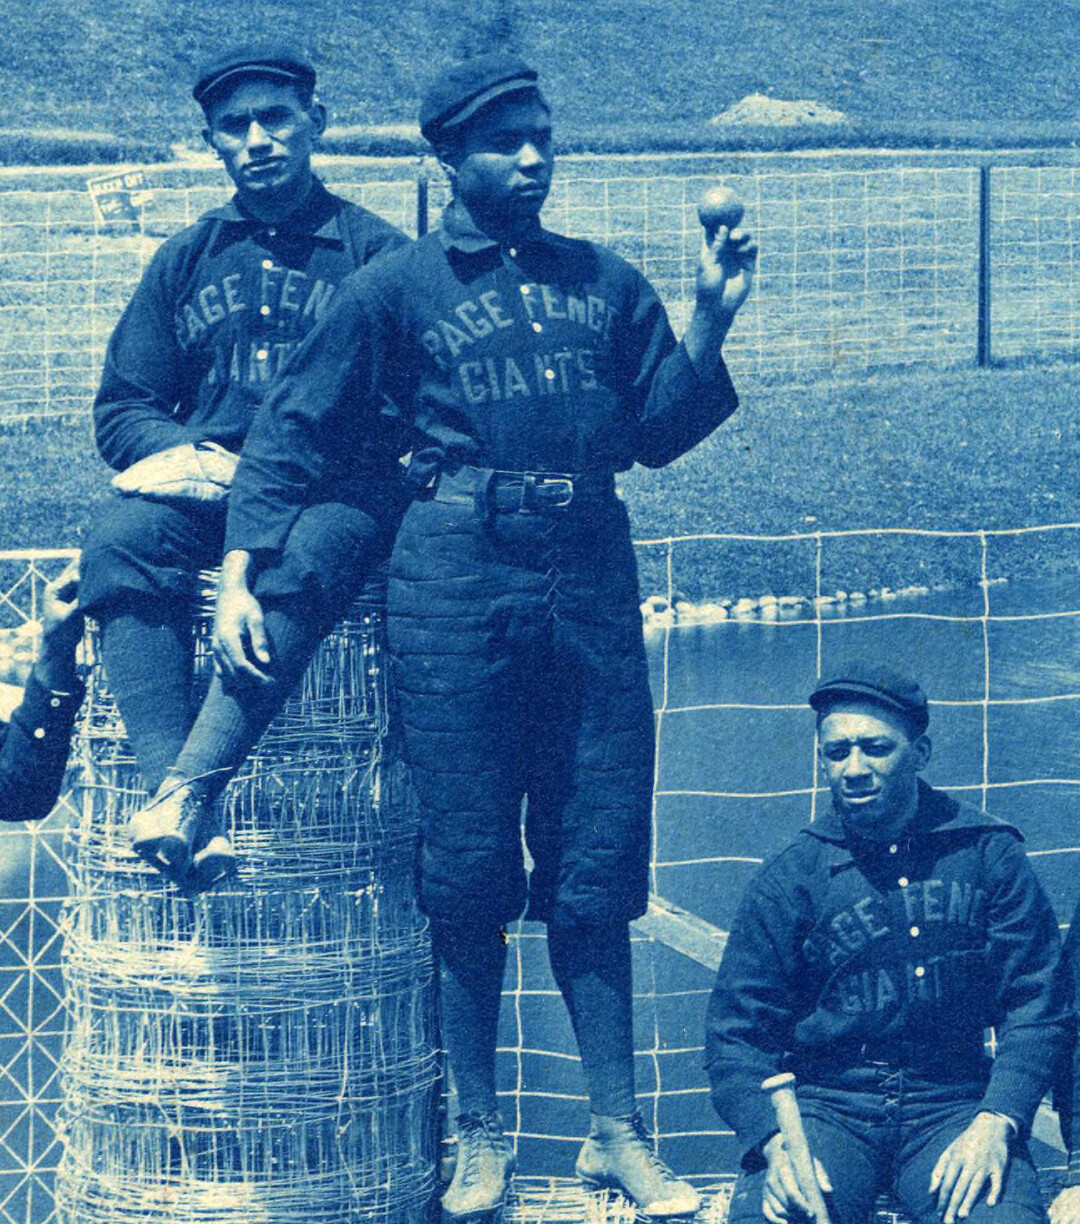 BASEBALL GIANT. George Wilson (center) played for the Micigan-based Page Fence Giants, an all-Black team from Adrian, Michigan, from 1986-98. (Photo courtesy <a href="https://dp.la/item/e531d2a902c4c69179e230568d07813b?q=page%20fence%20giants" target="_blank" rel="noopener" data-mce-href="https://dp.la/item/e531d2a902c4c69179e230568d07813b?q=page%20fence%20giants">University of Michigan Bentley Historical Library</a>)